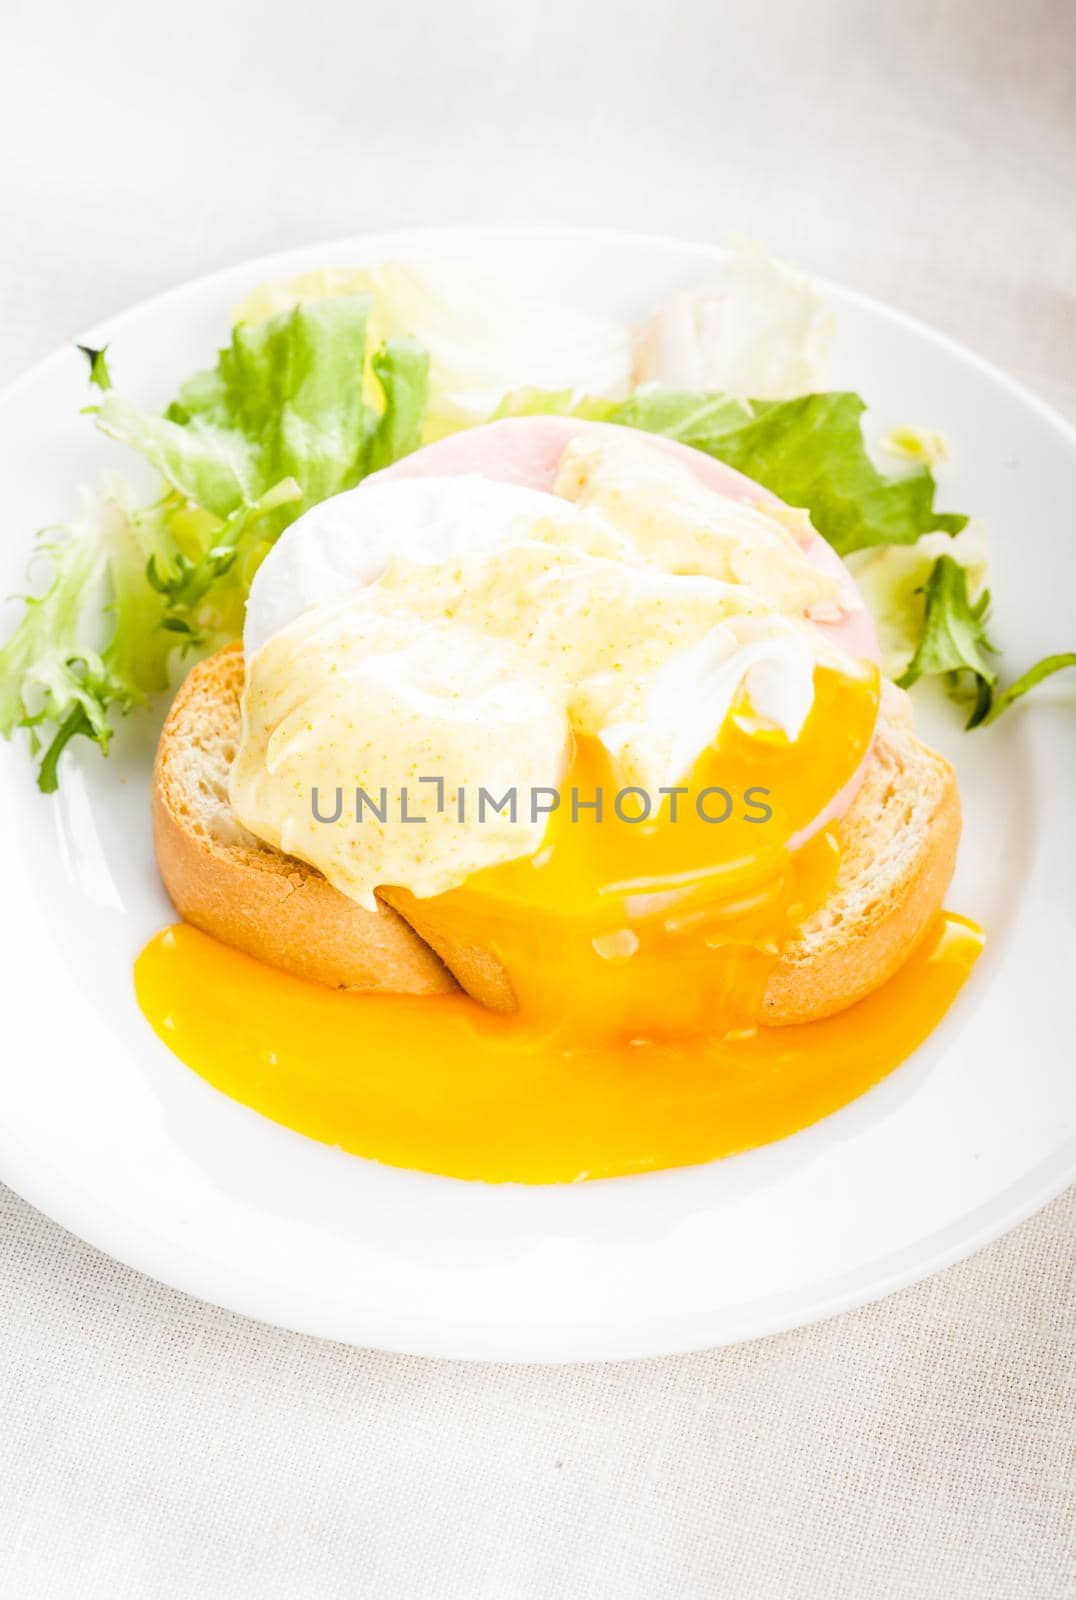 Eggs benedict close up on white plate, serving table